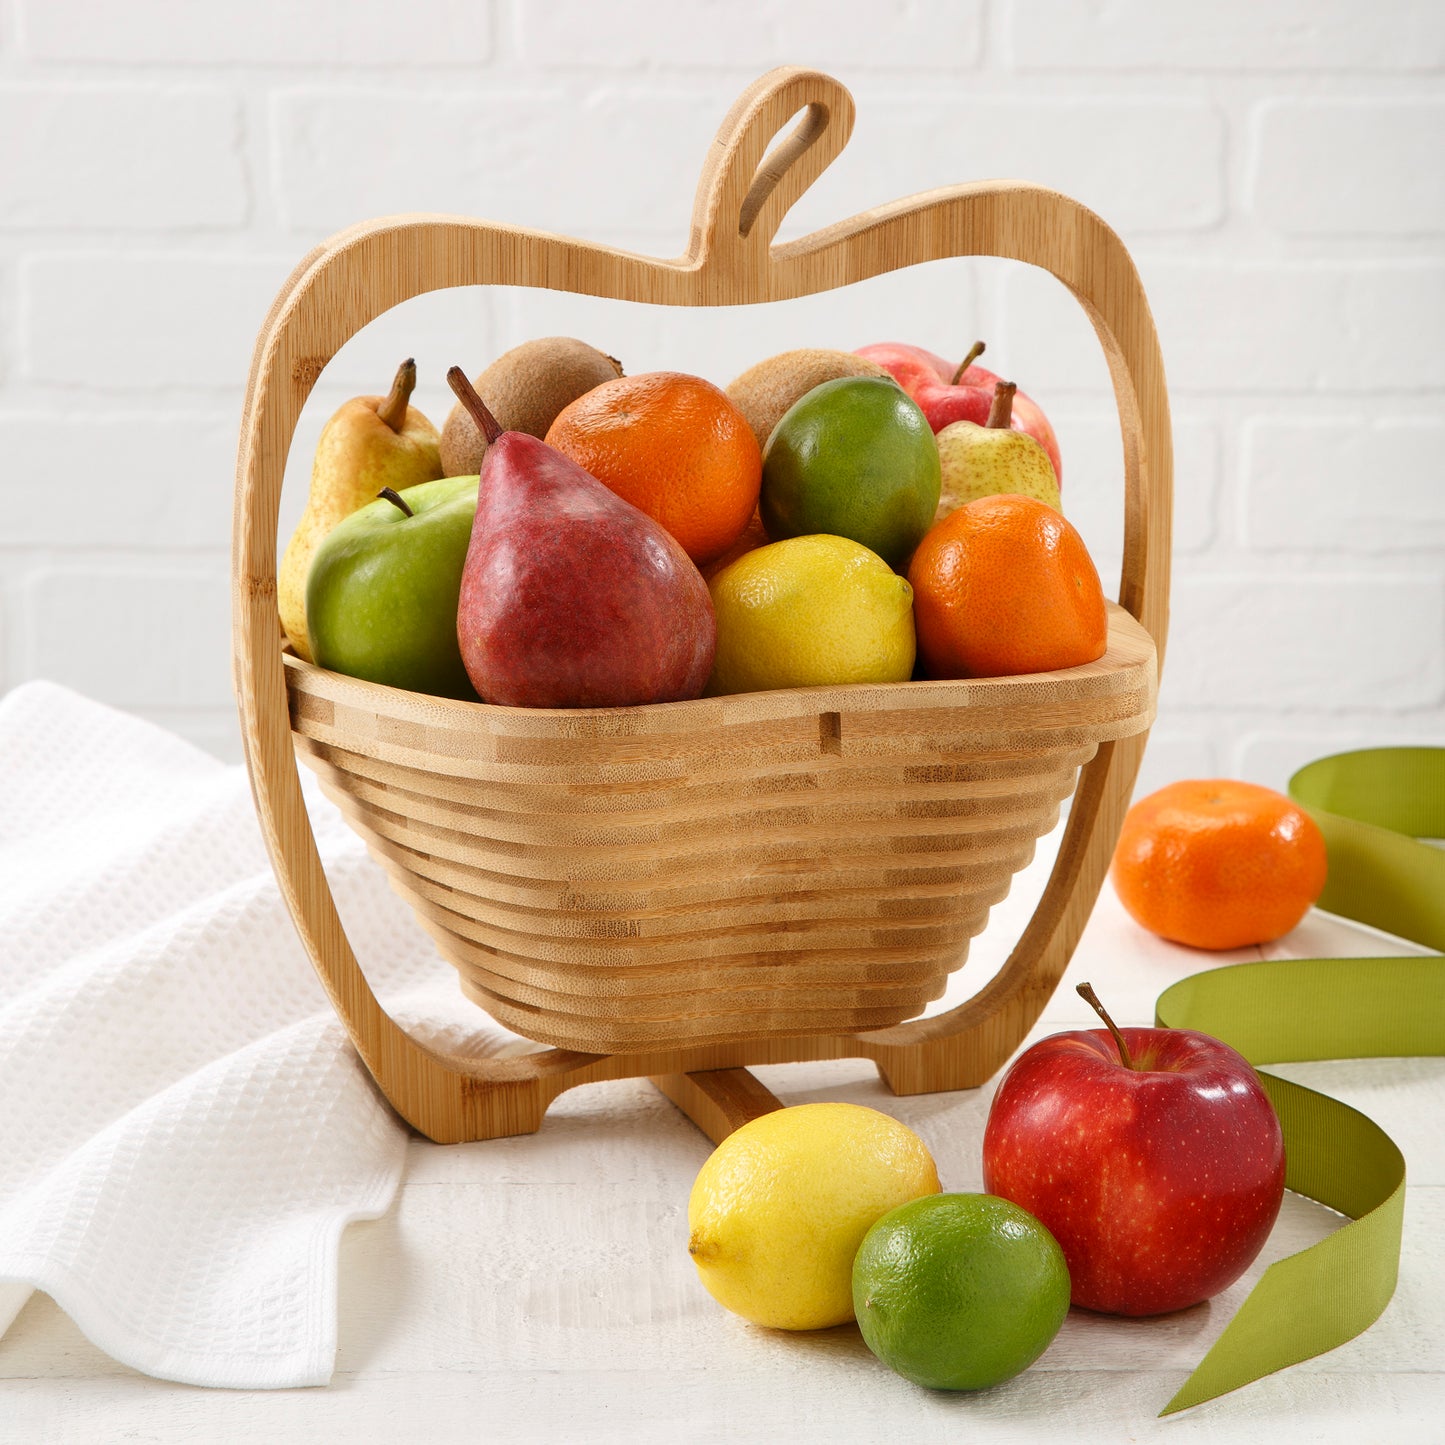 An apple shaped wooden basket filled with an assortment of fruit